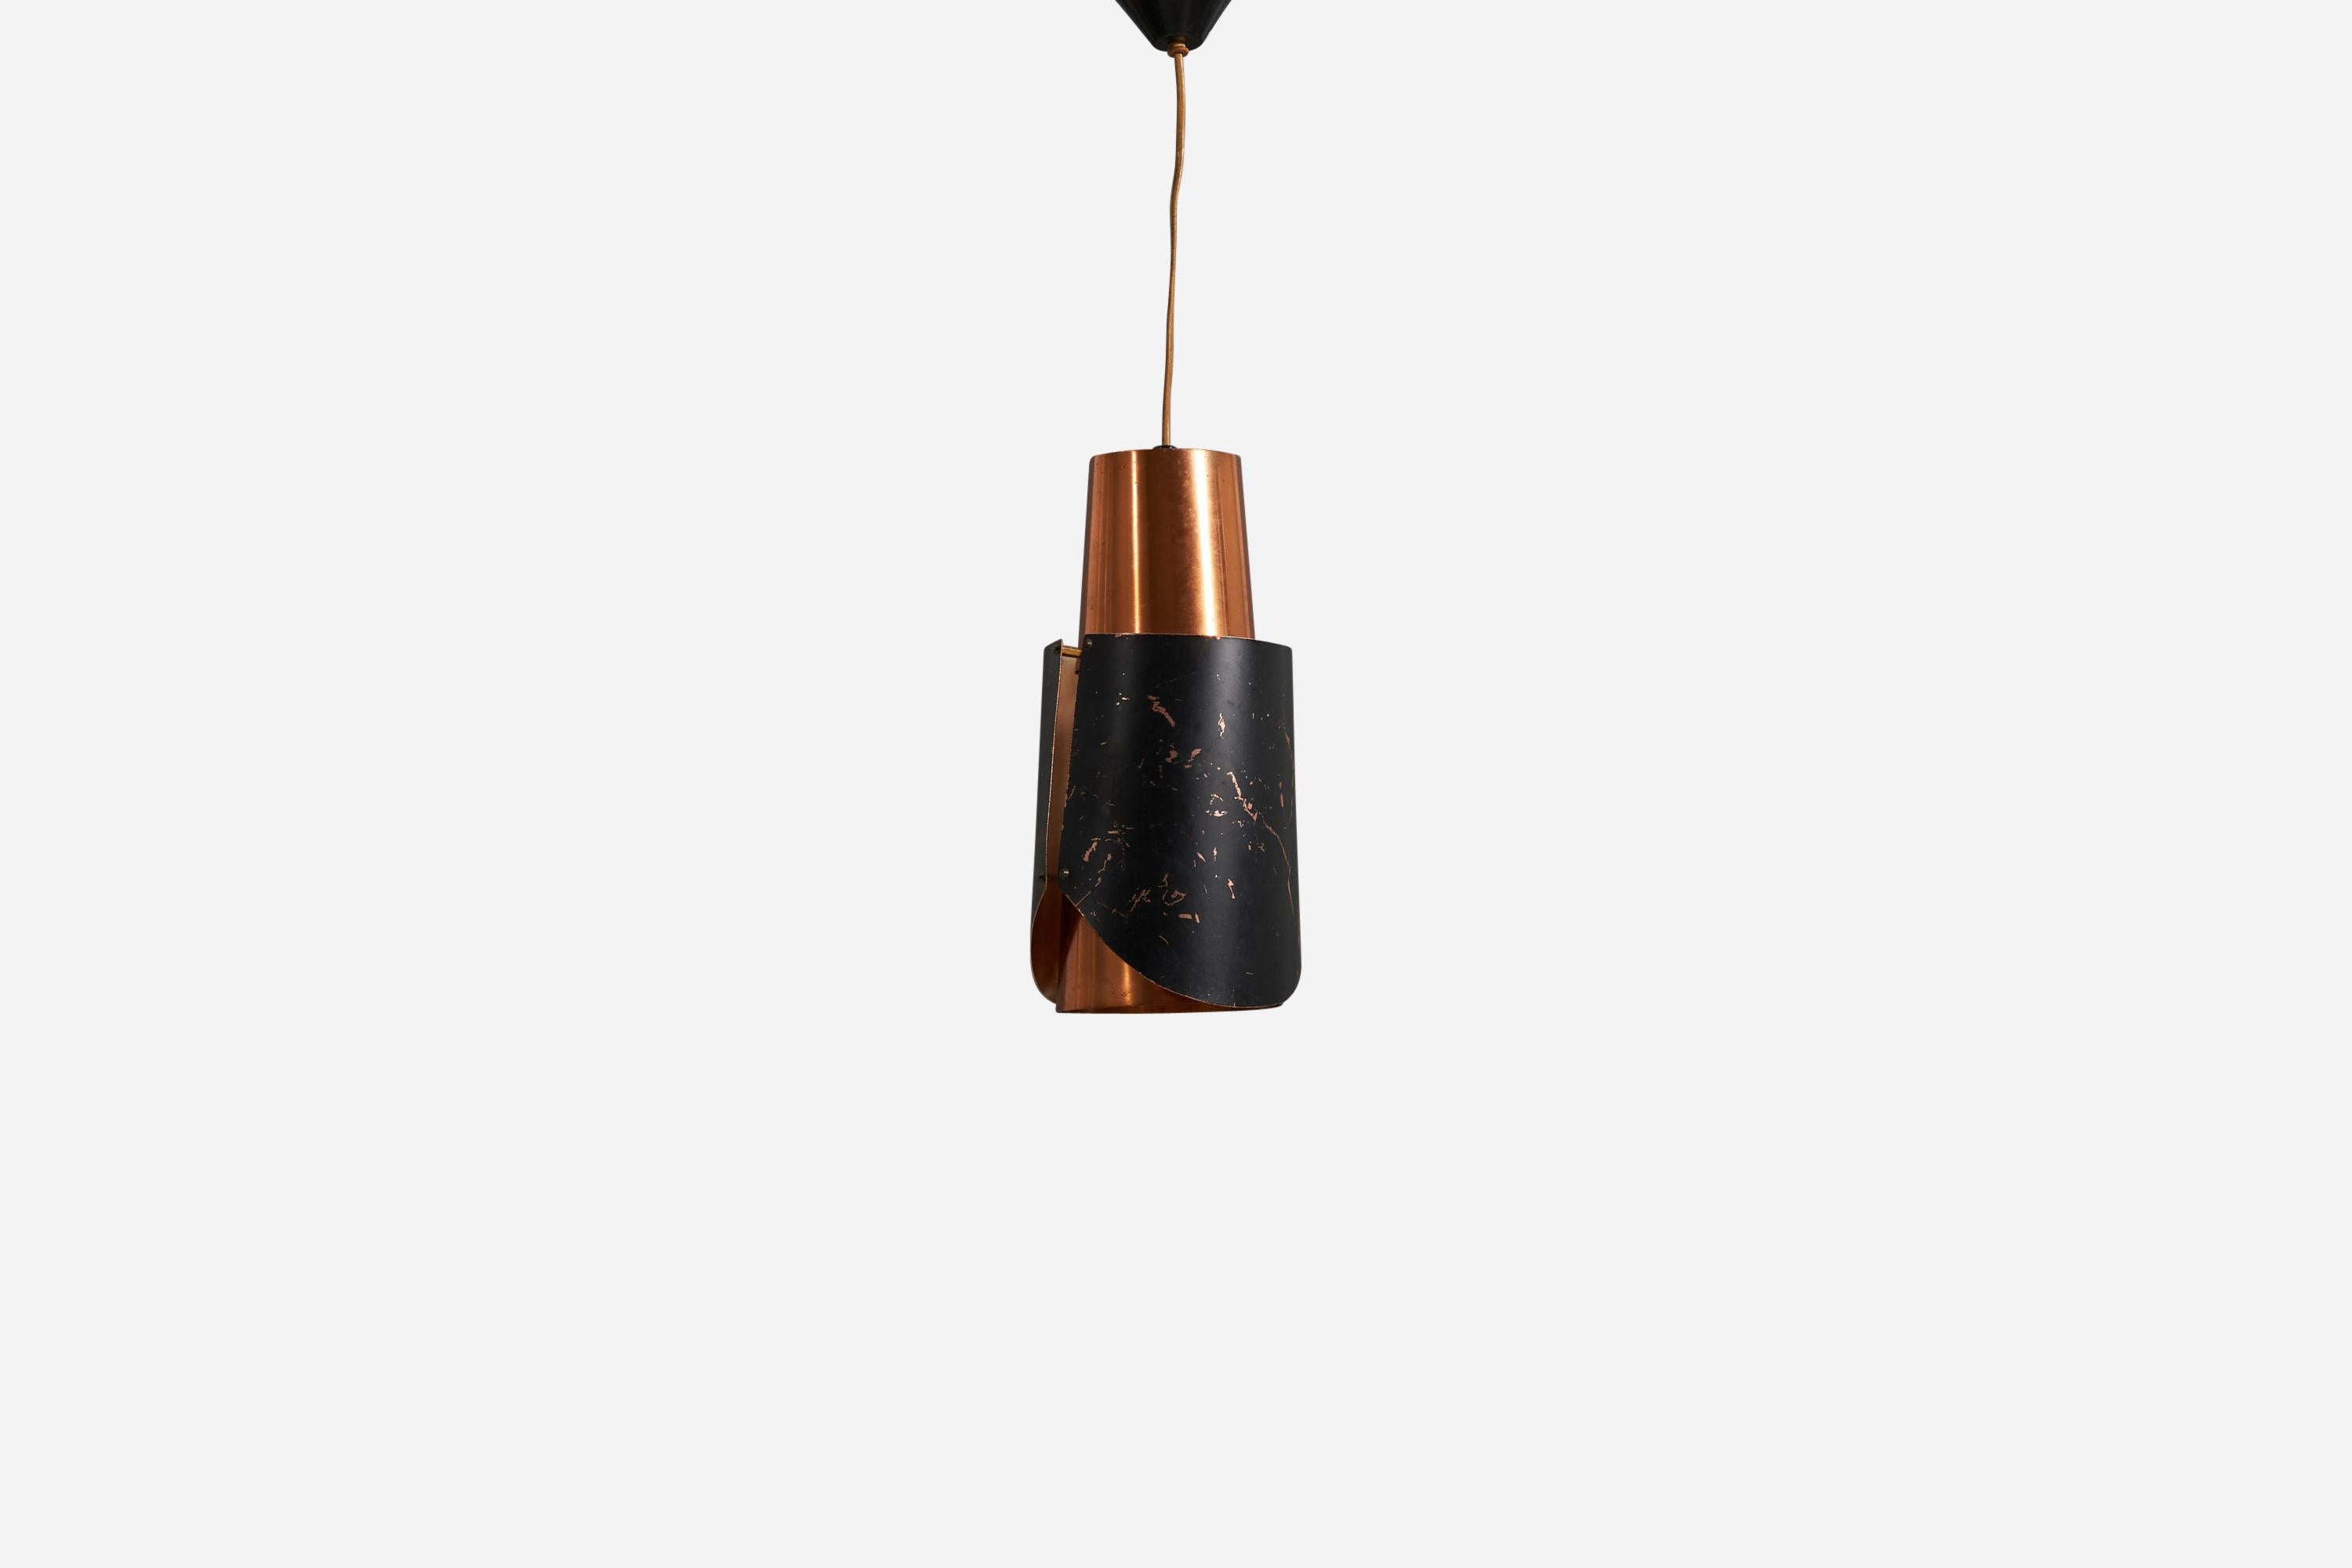 Mid-20th Century Bent Karlby, Pendant Light, Copper, Lacquered Metal, Lyfa Denmark 1960s For Sale